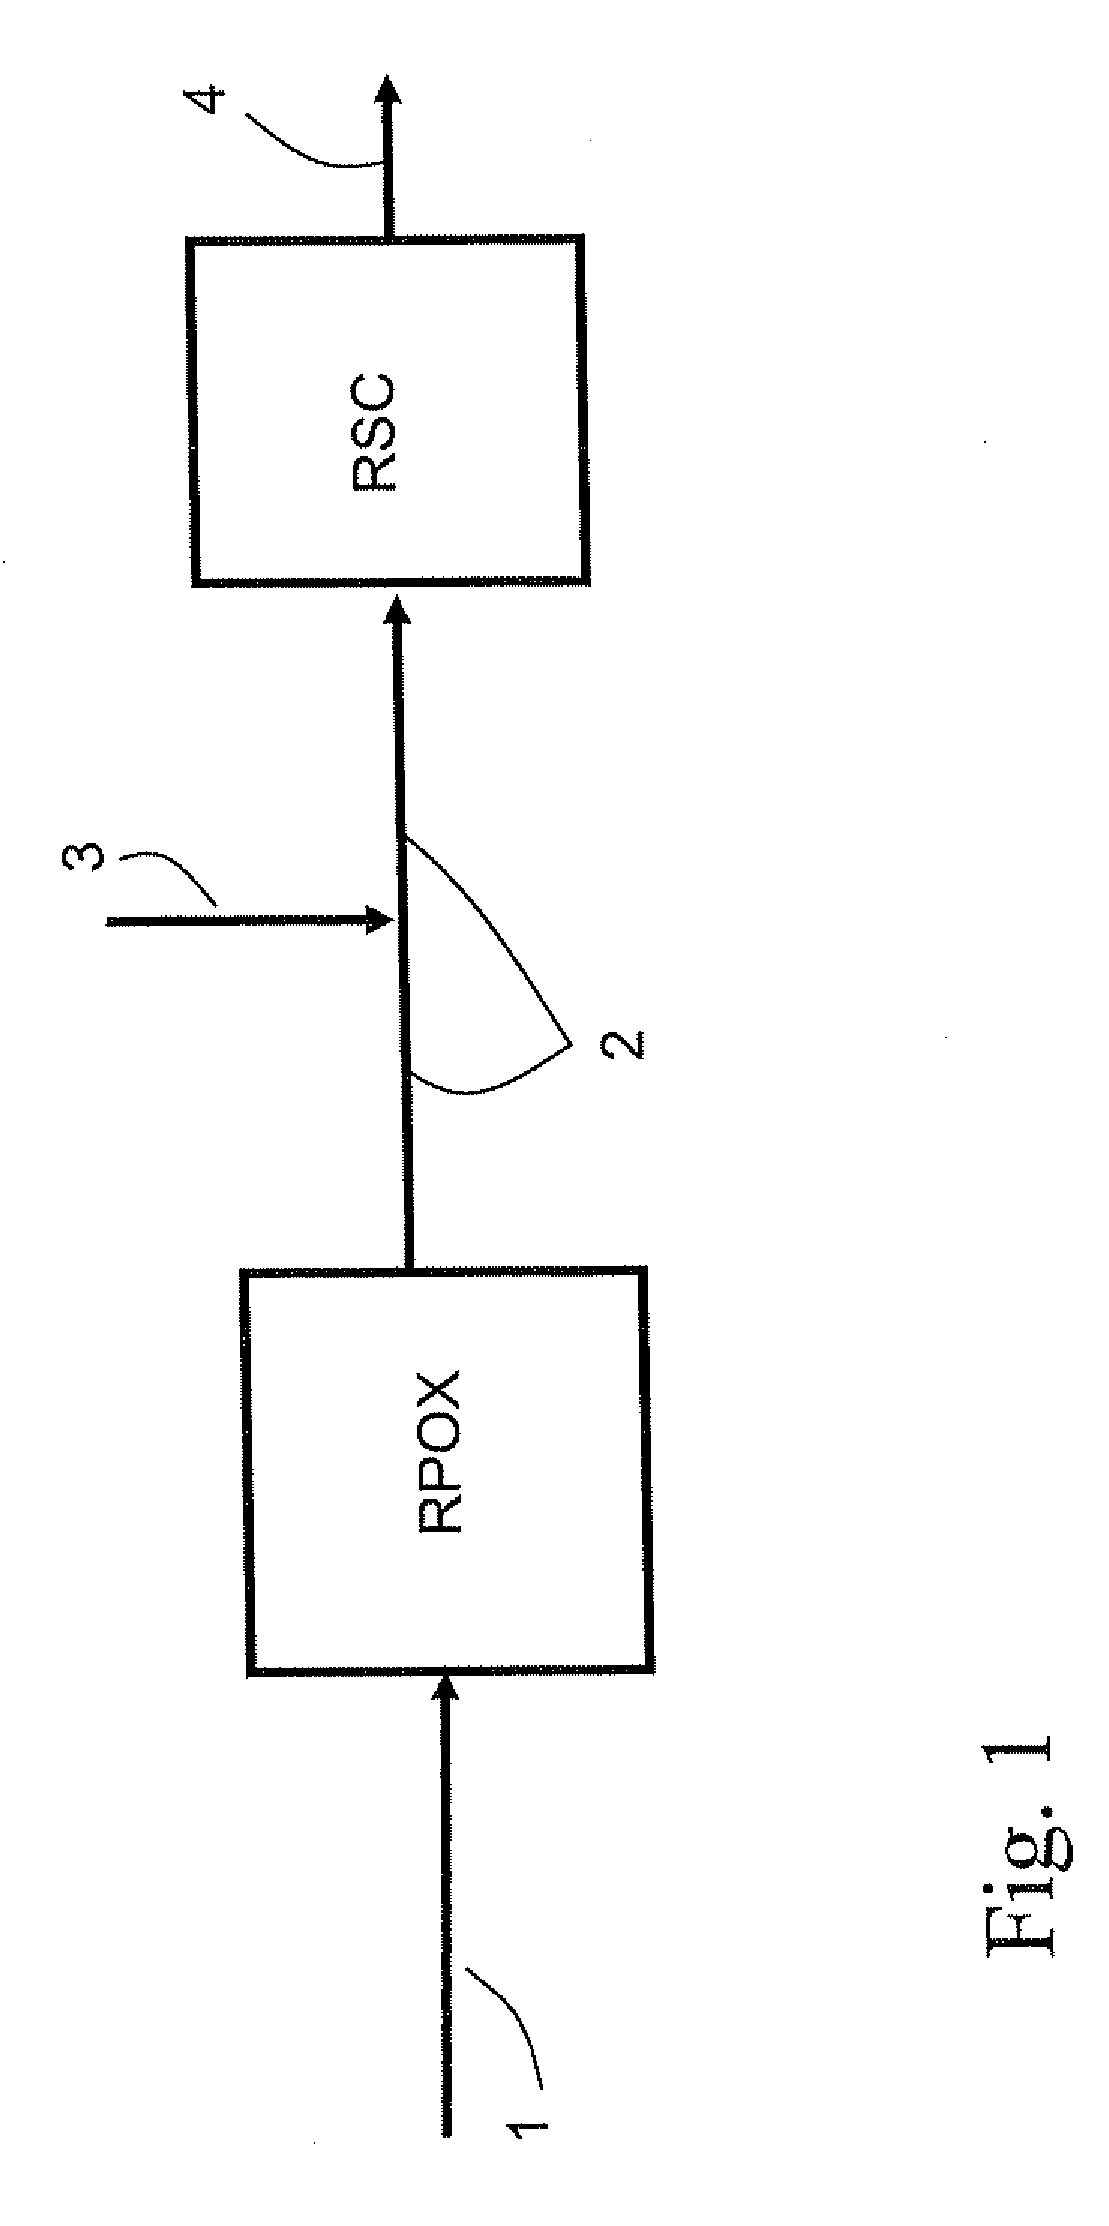 Method of producing synthetic gas with partial oxidation and steam reforming